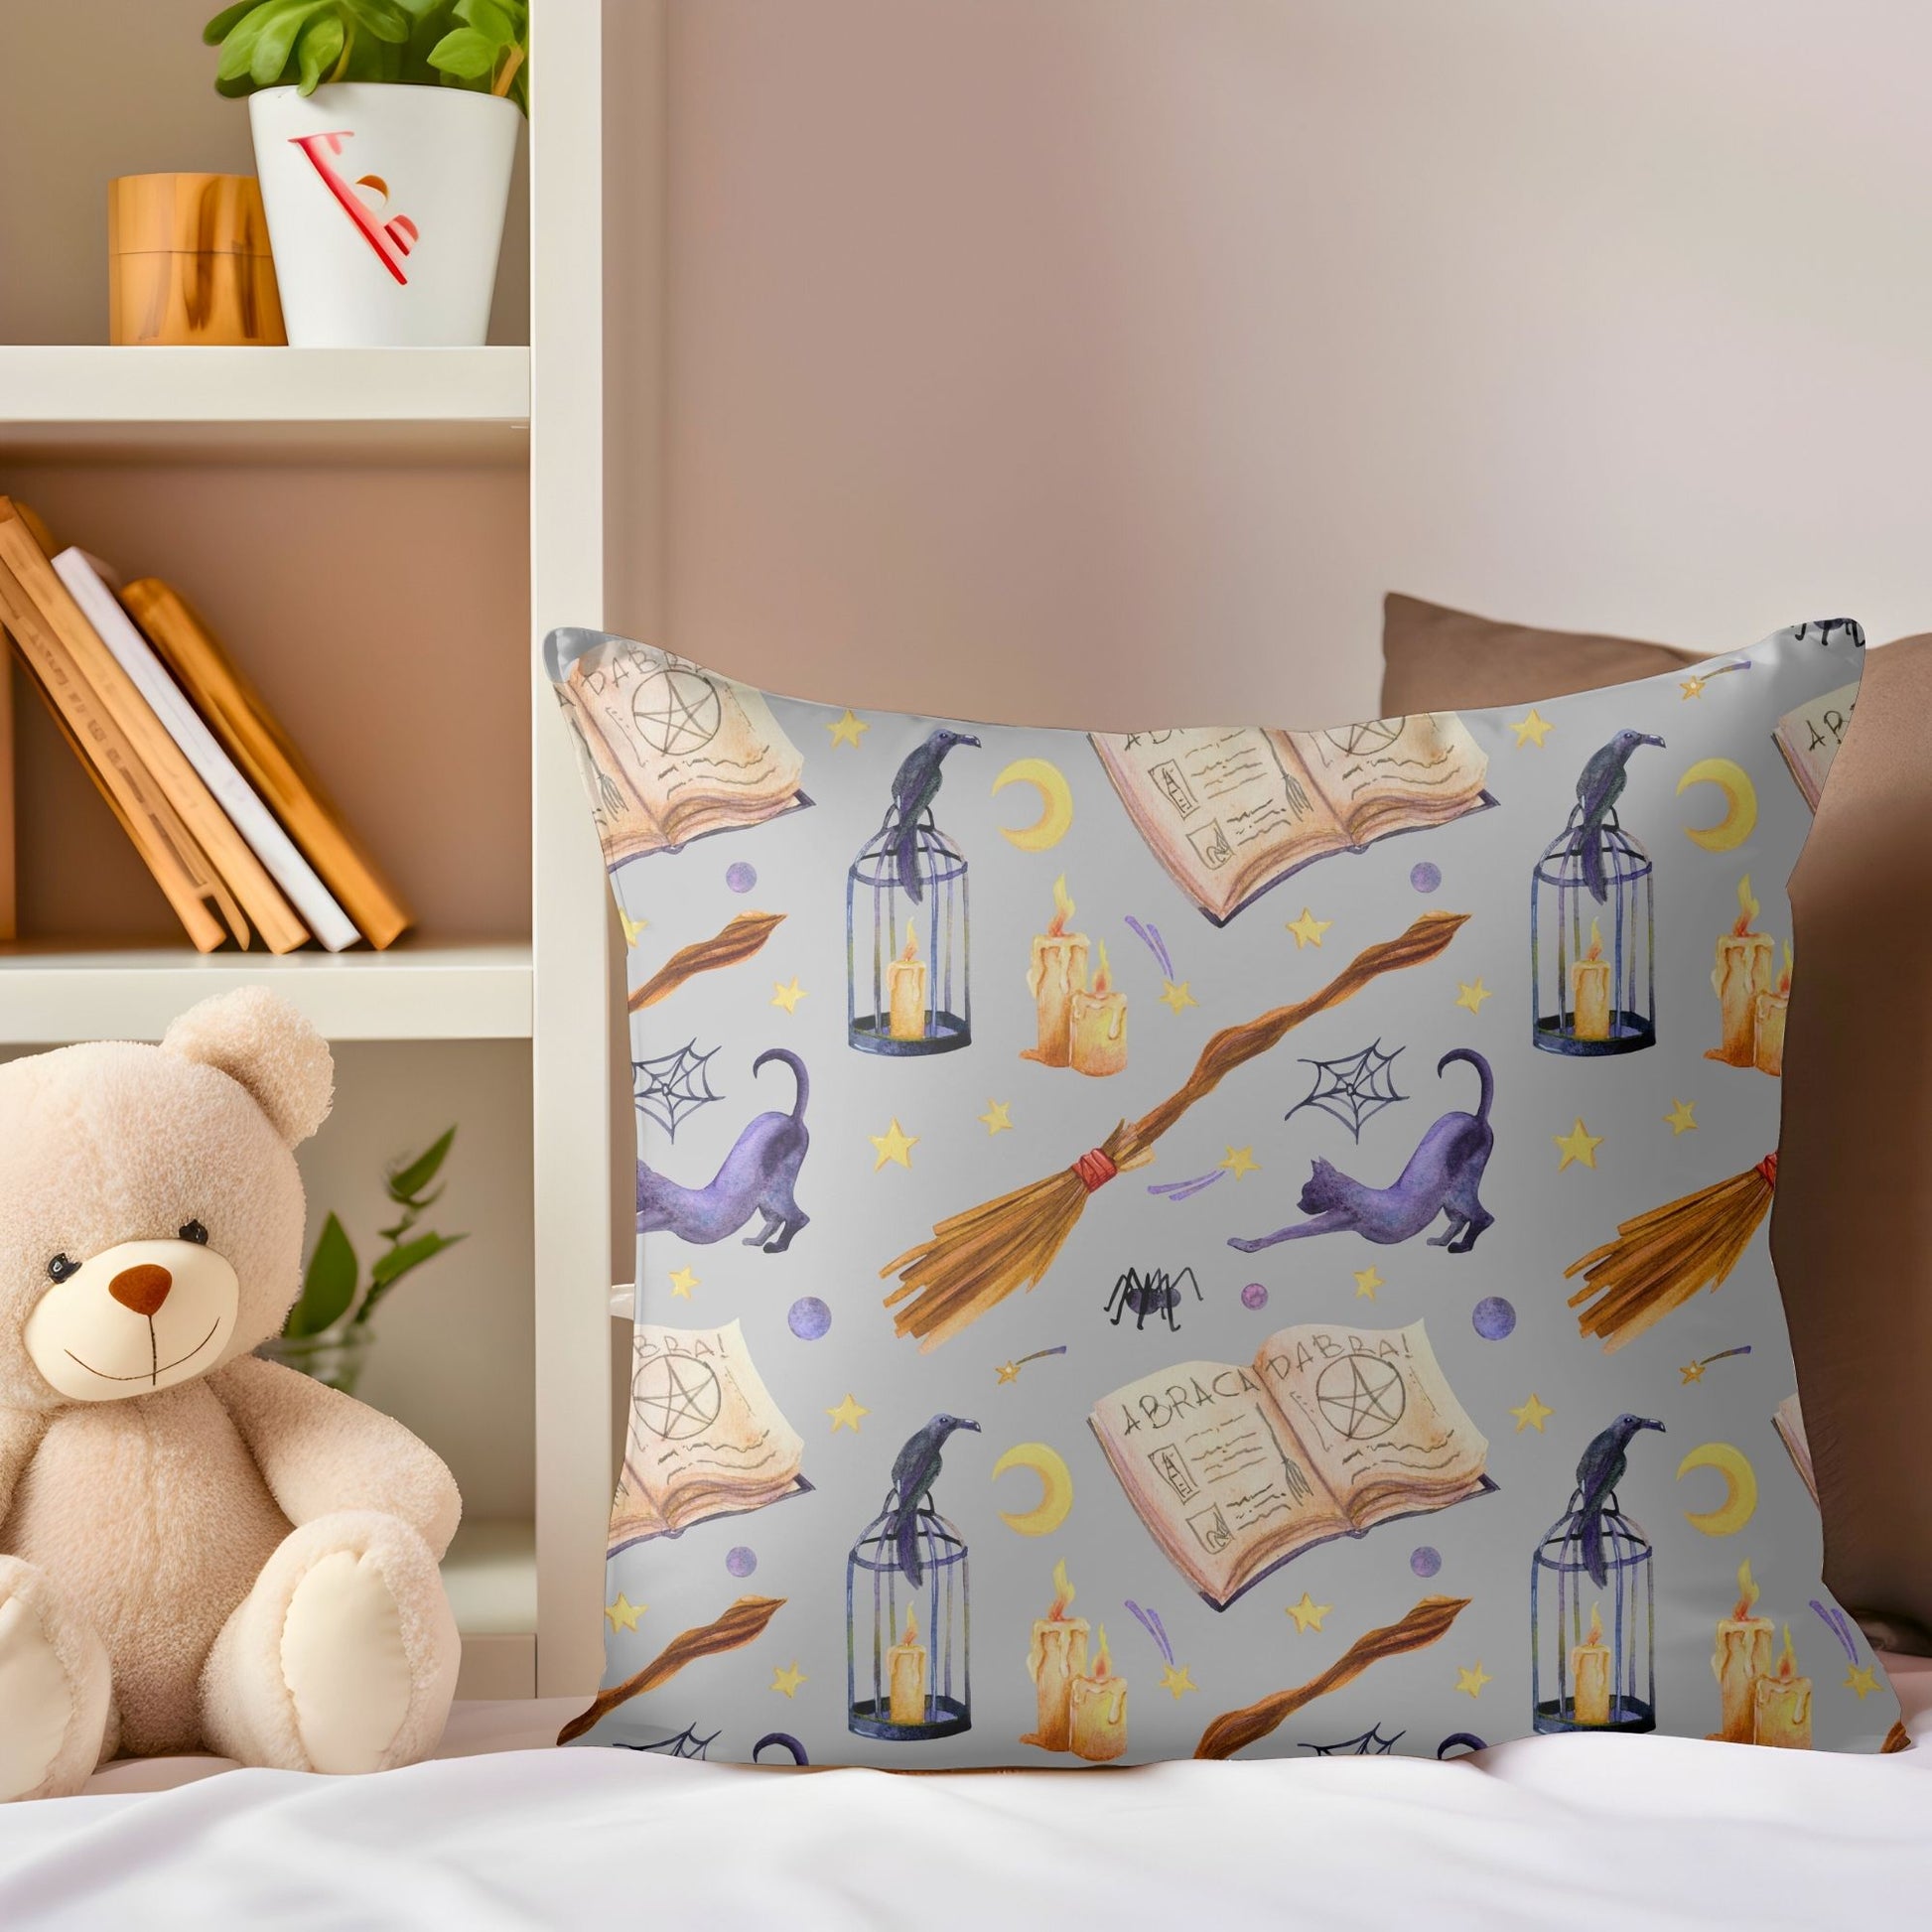 Soft pillow adorned with enchanting wizarding motifs for children's rooms.